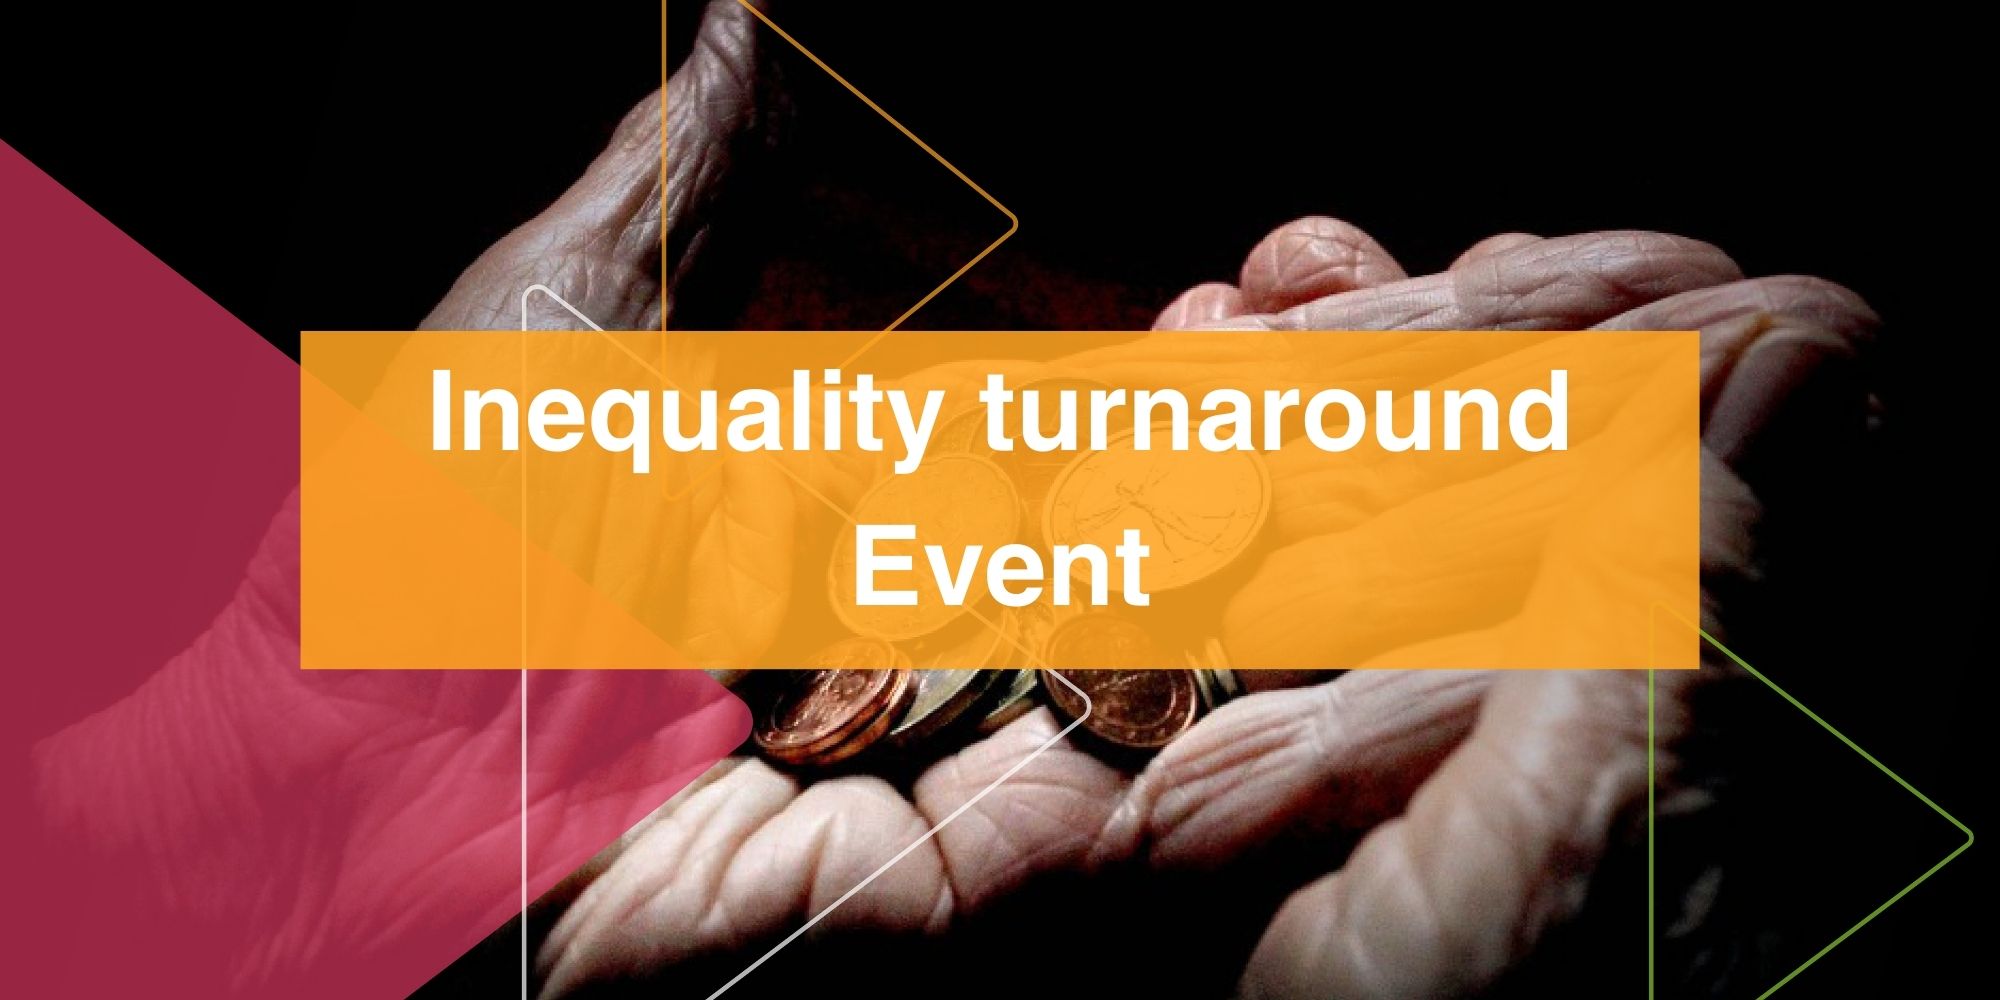 Announcement: Event on the inequality turnaround